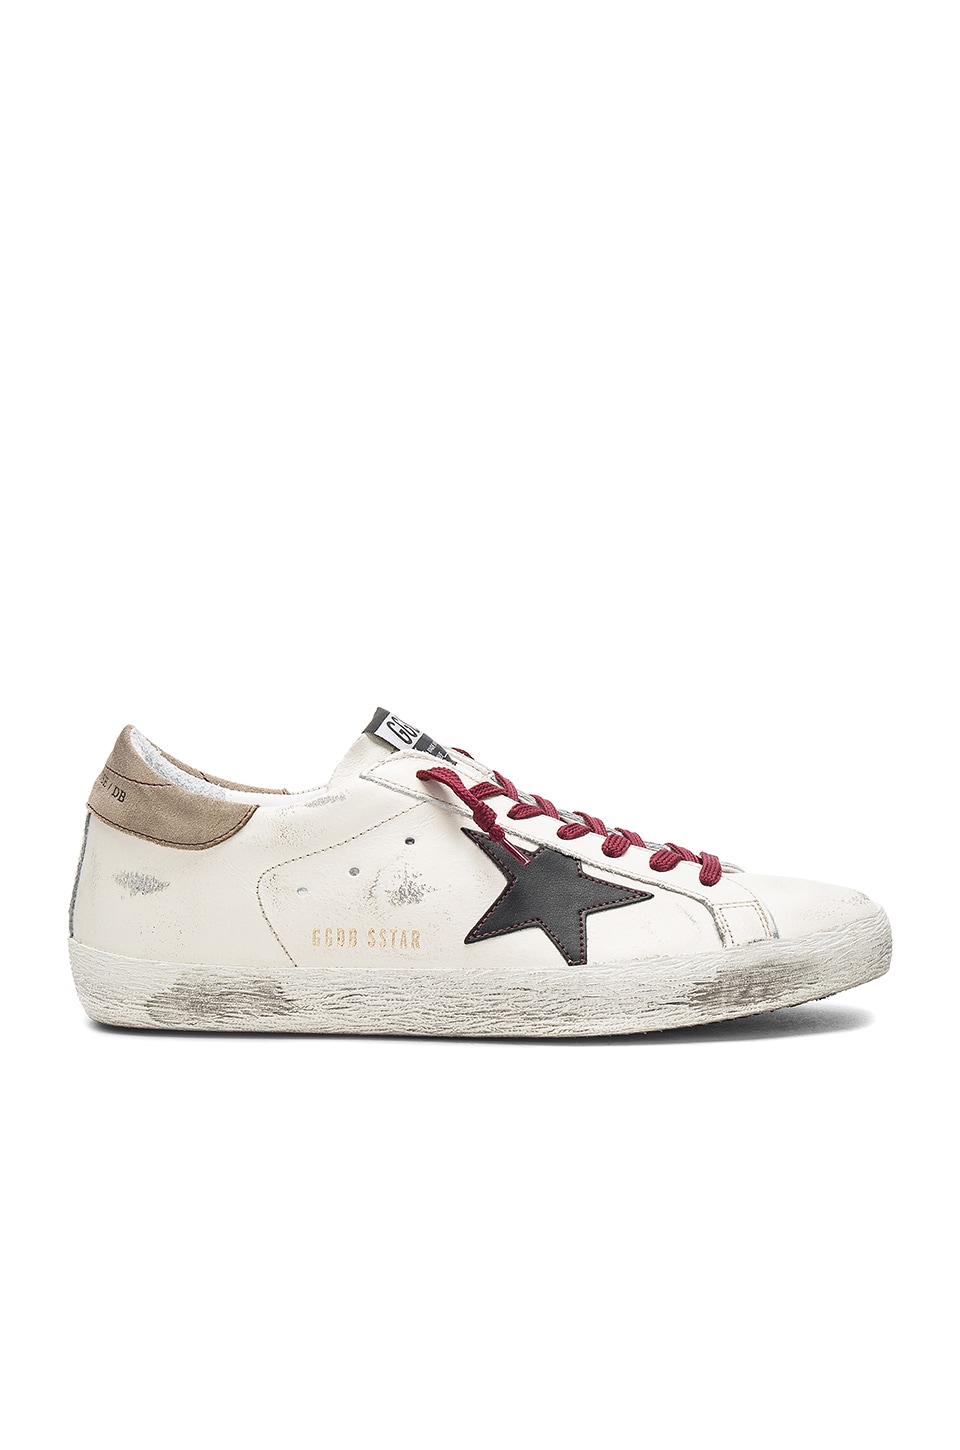 golden goose sneakers red laces